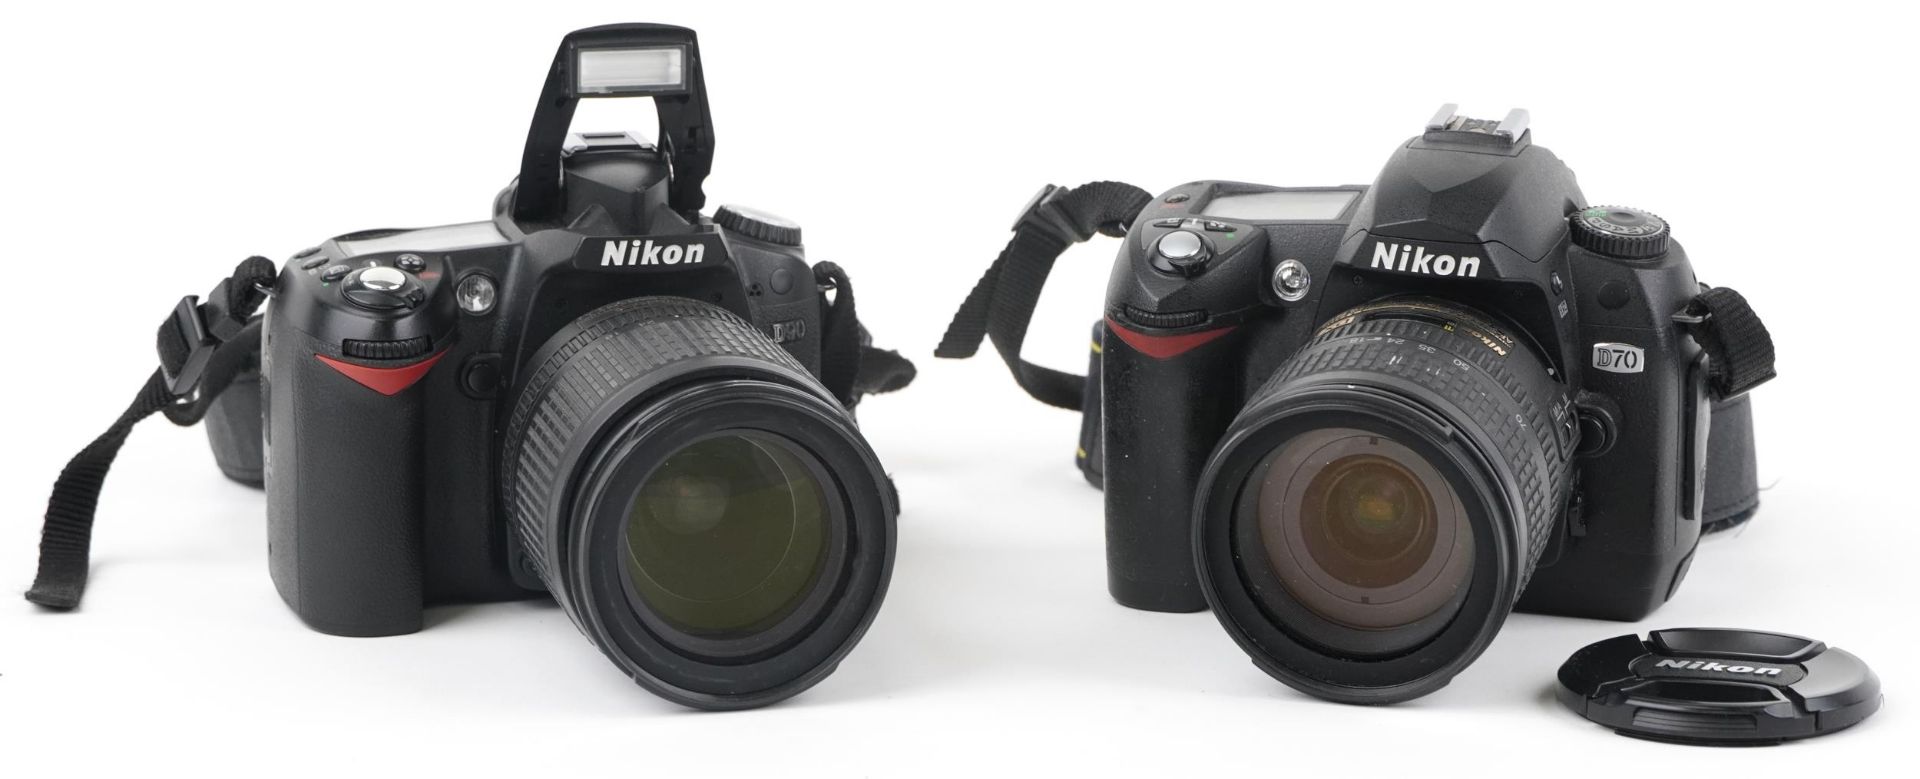 Two Nikon cameras with lenses comprising D 90 with Nikon DX AF-F Nikkor 18-105mm lens and D70 with